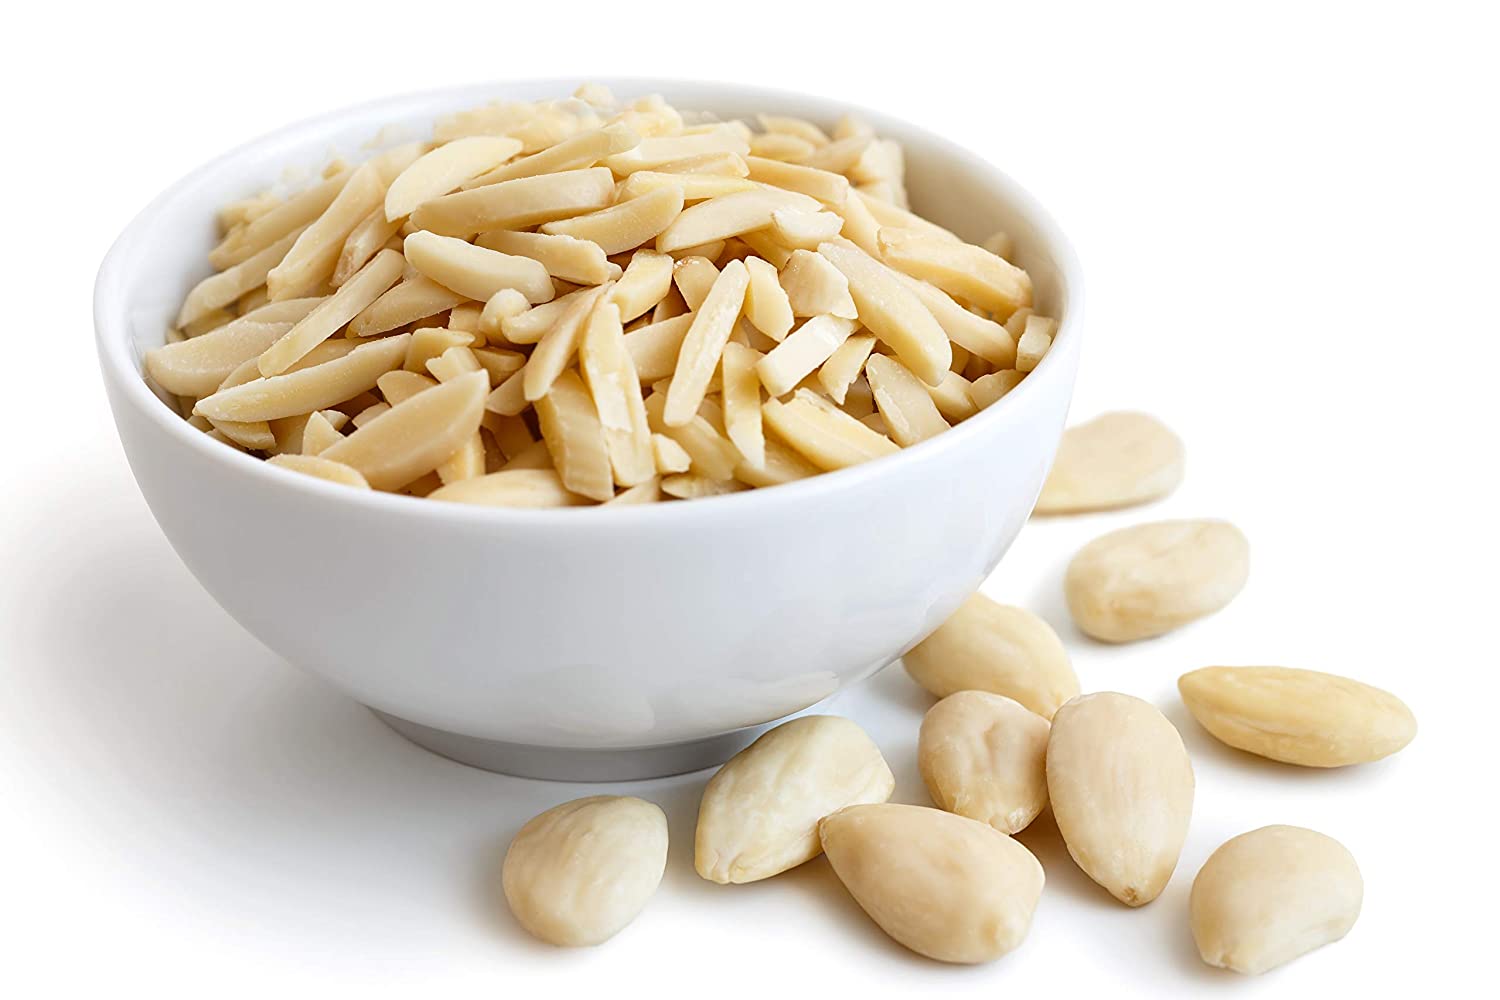 Slivered almonds: uses and applications in the food industry